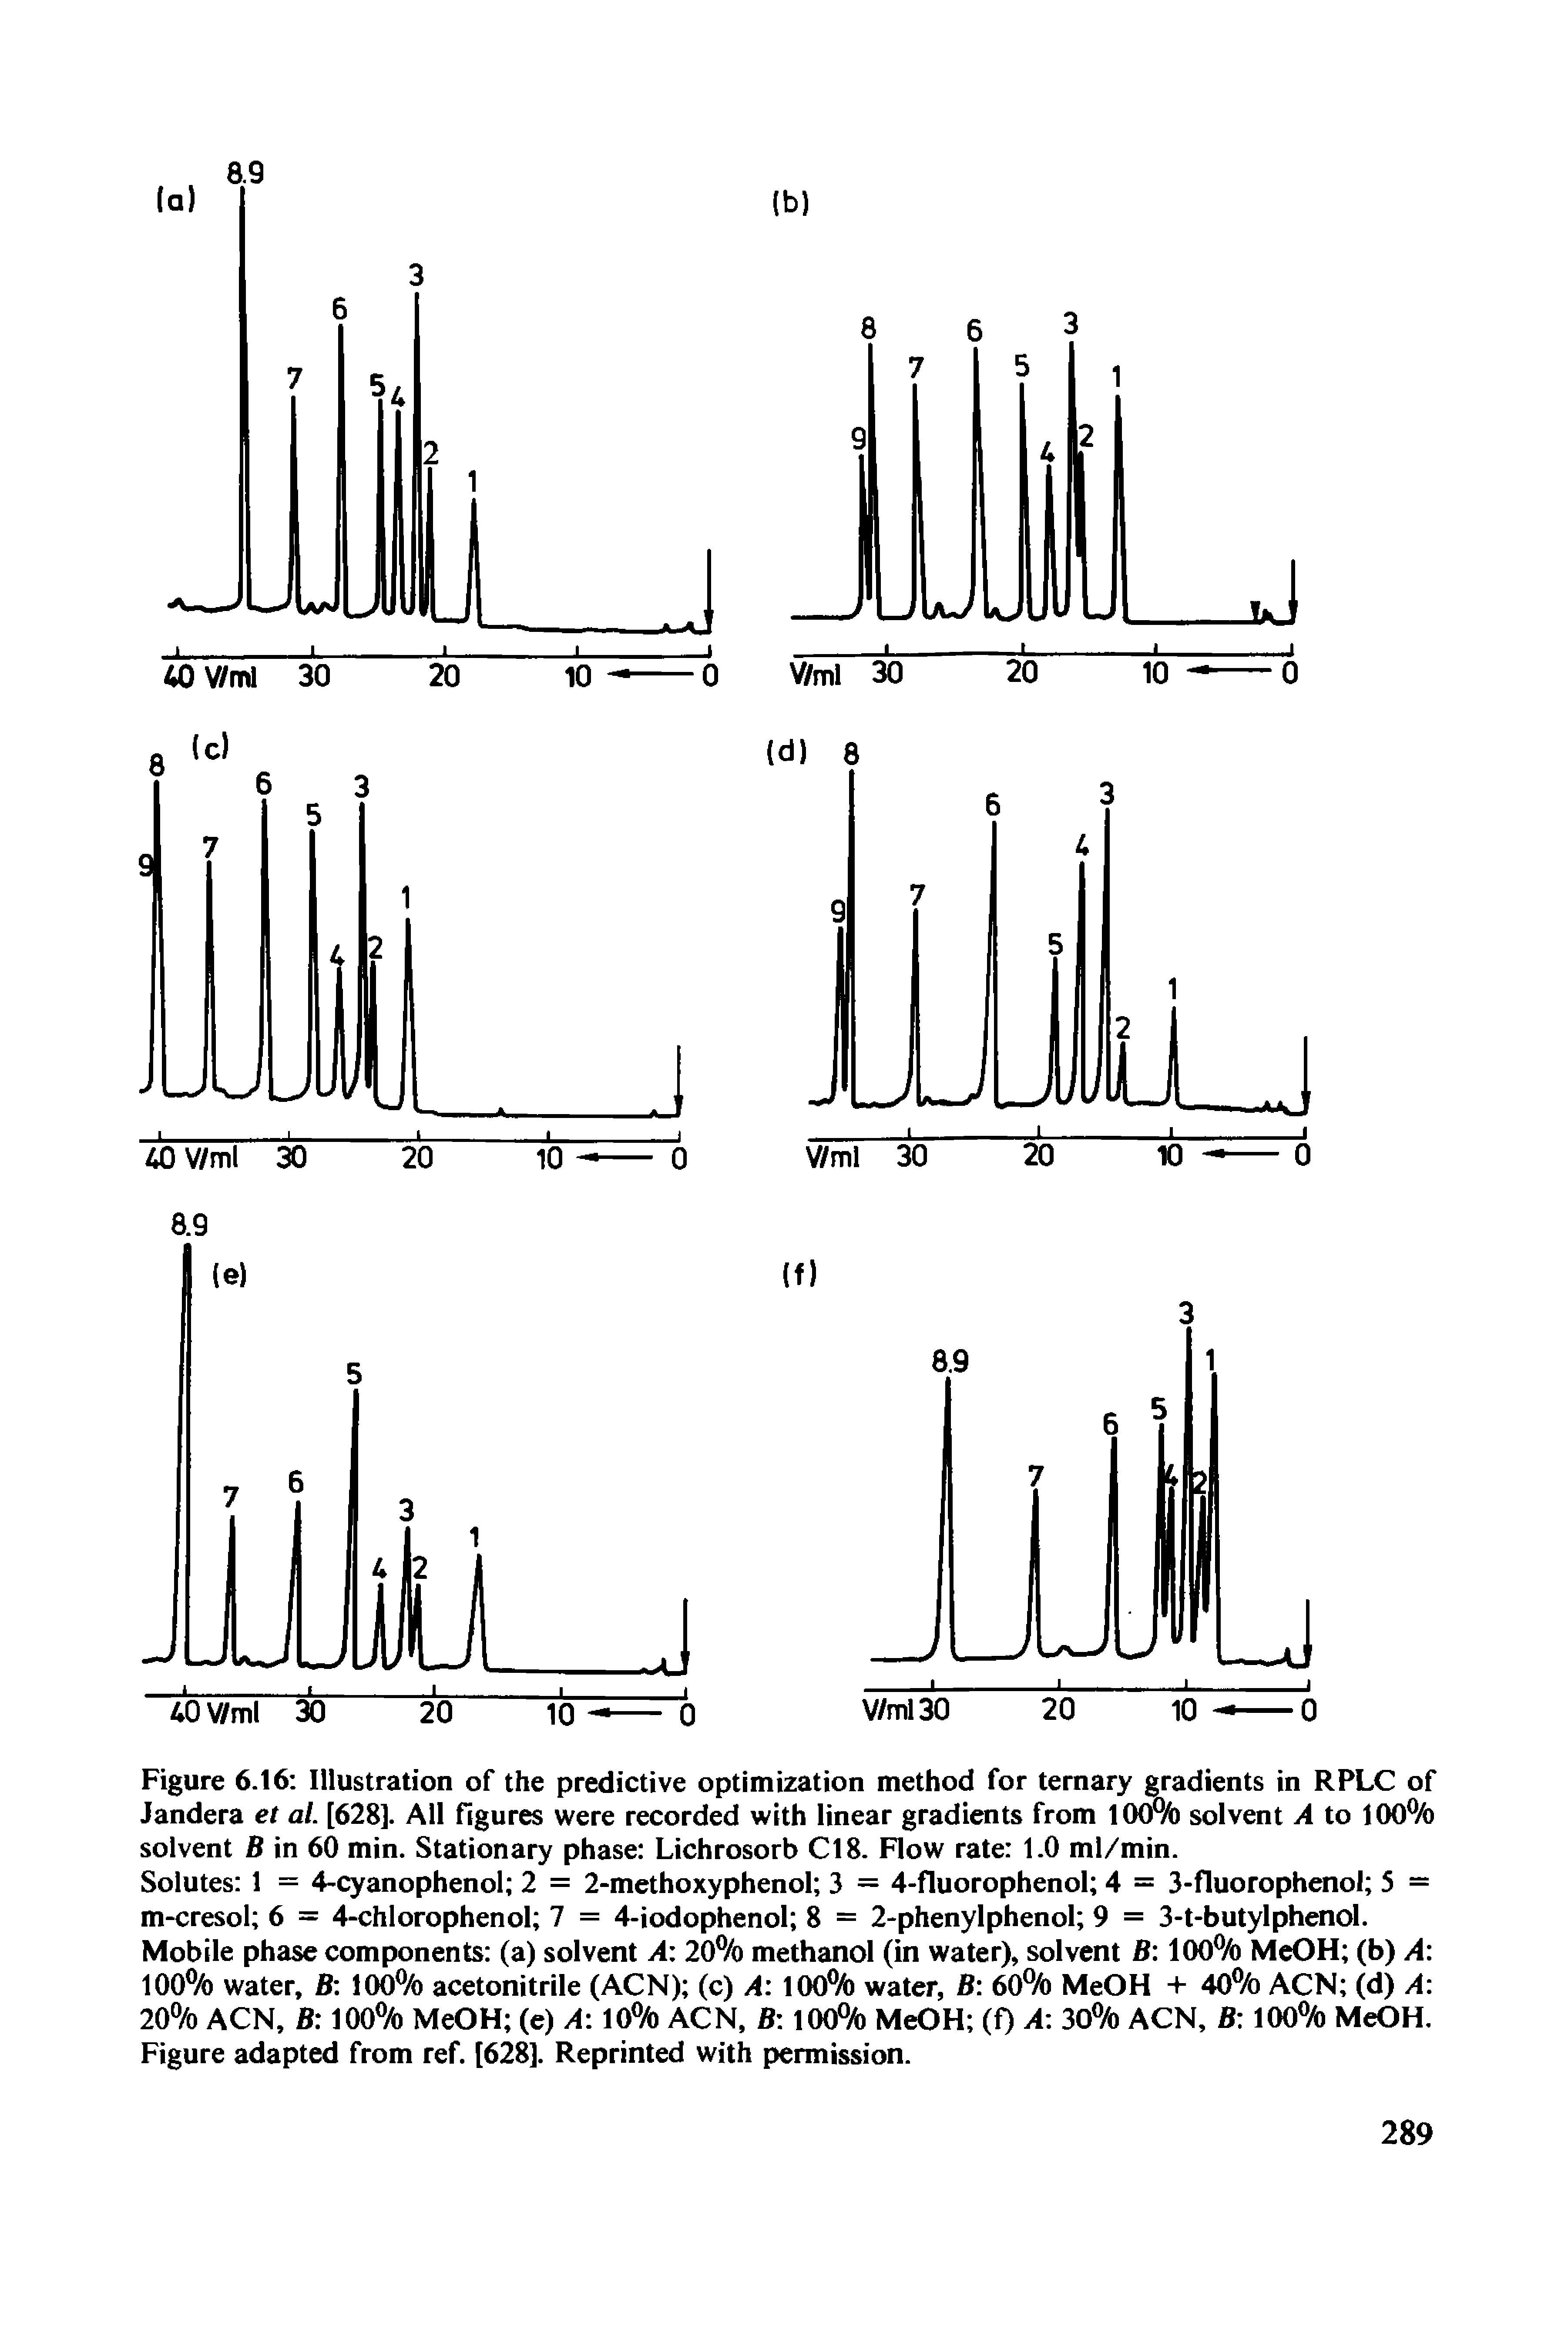 Figure 6.16 Illustration of the predictive optimization method for ternary gradients in RPLC of Jandera et ai [628]. All figures were recorded with linear gradients from 100% solvent A to 100% solvent B in 60 min. Stationary phase Lichrosorb Cl8. Flow rate 1.0 ml/min.